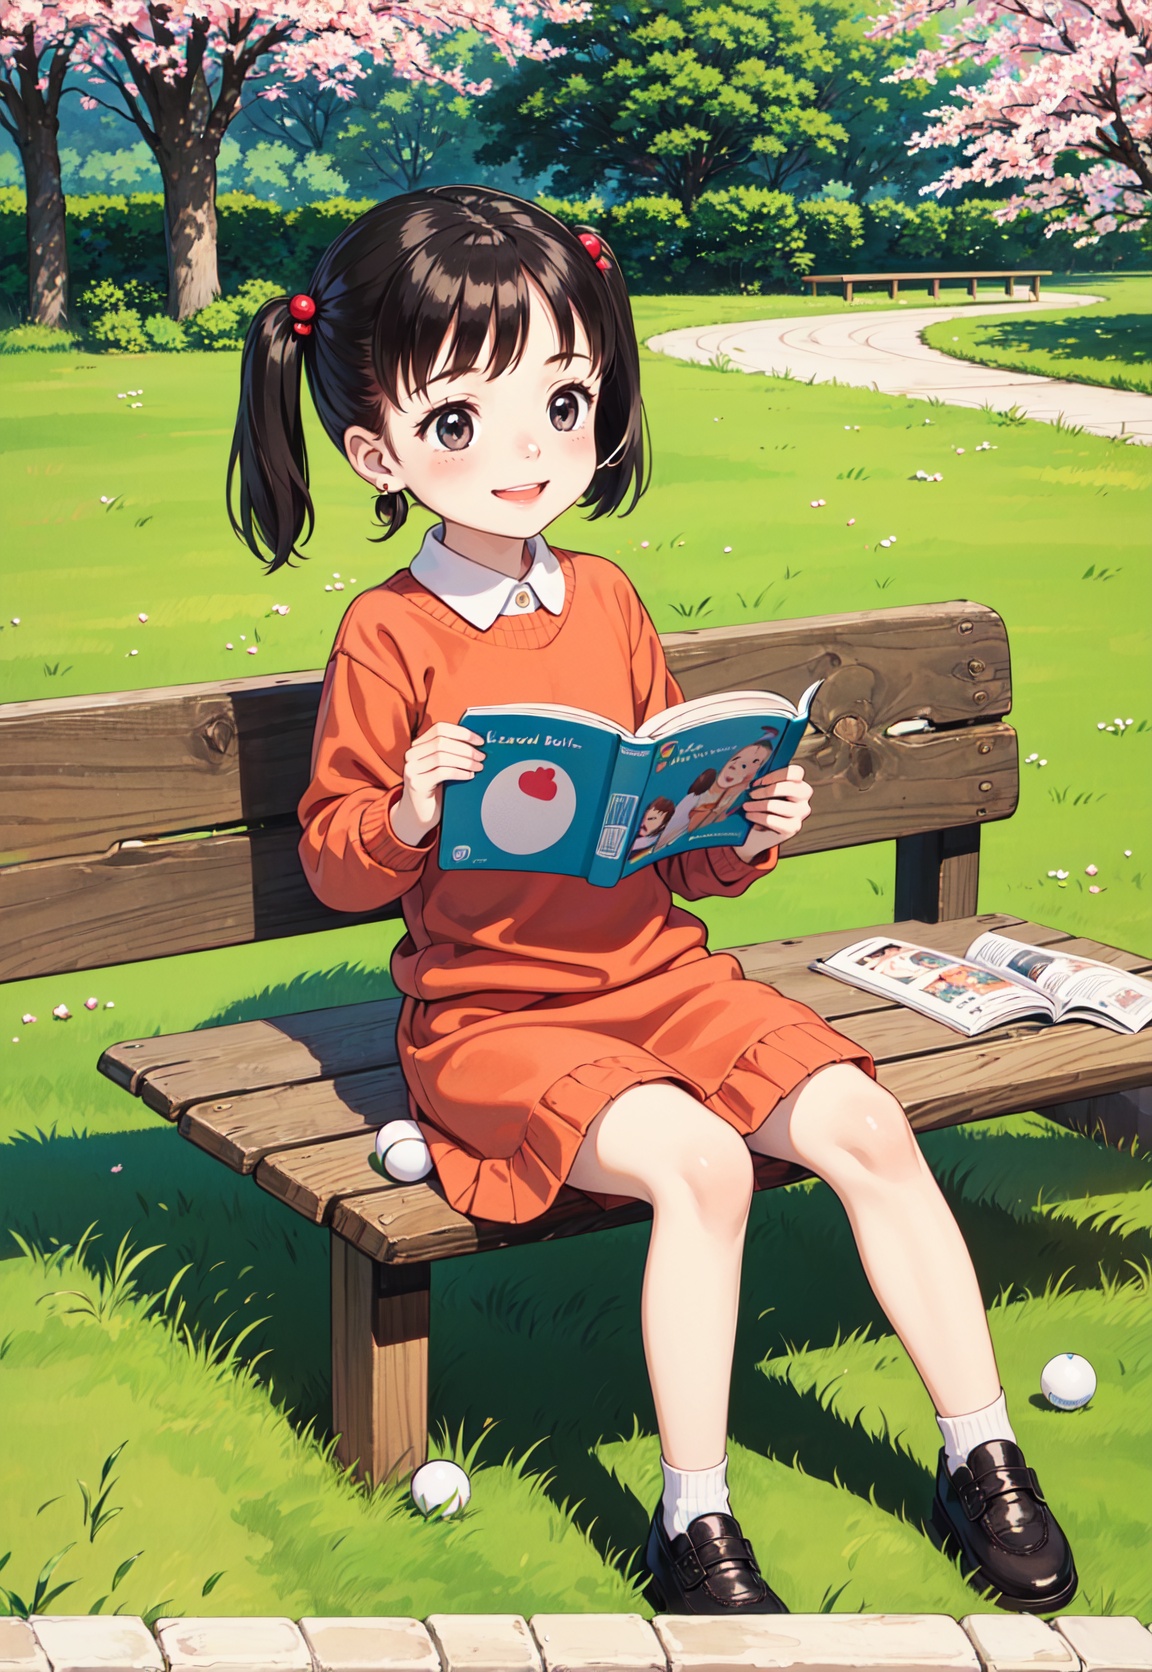 ((A child,small cute plush ball errings,pigtails,jumper skirt,A charming smile,reading picture-story book)),Parks, lawns, cherry trees, benches,masterpiece, best quality,
